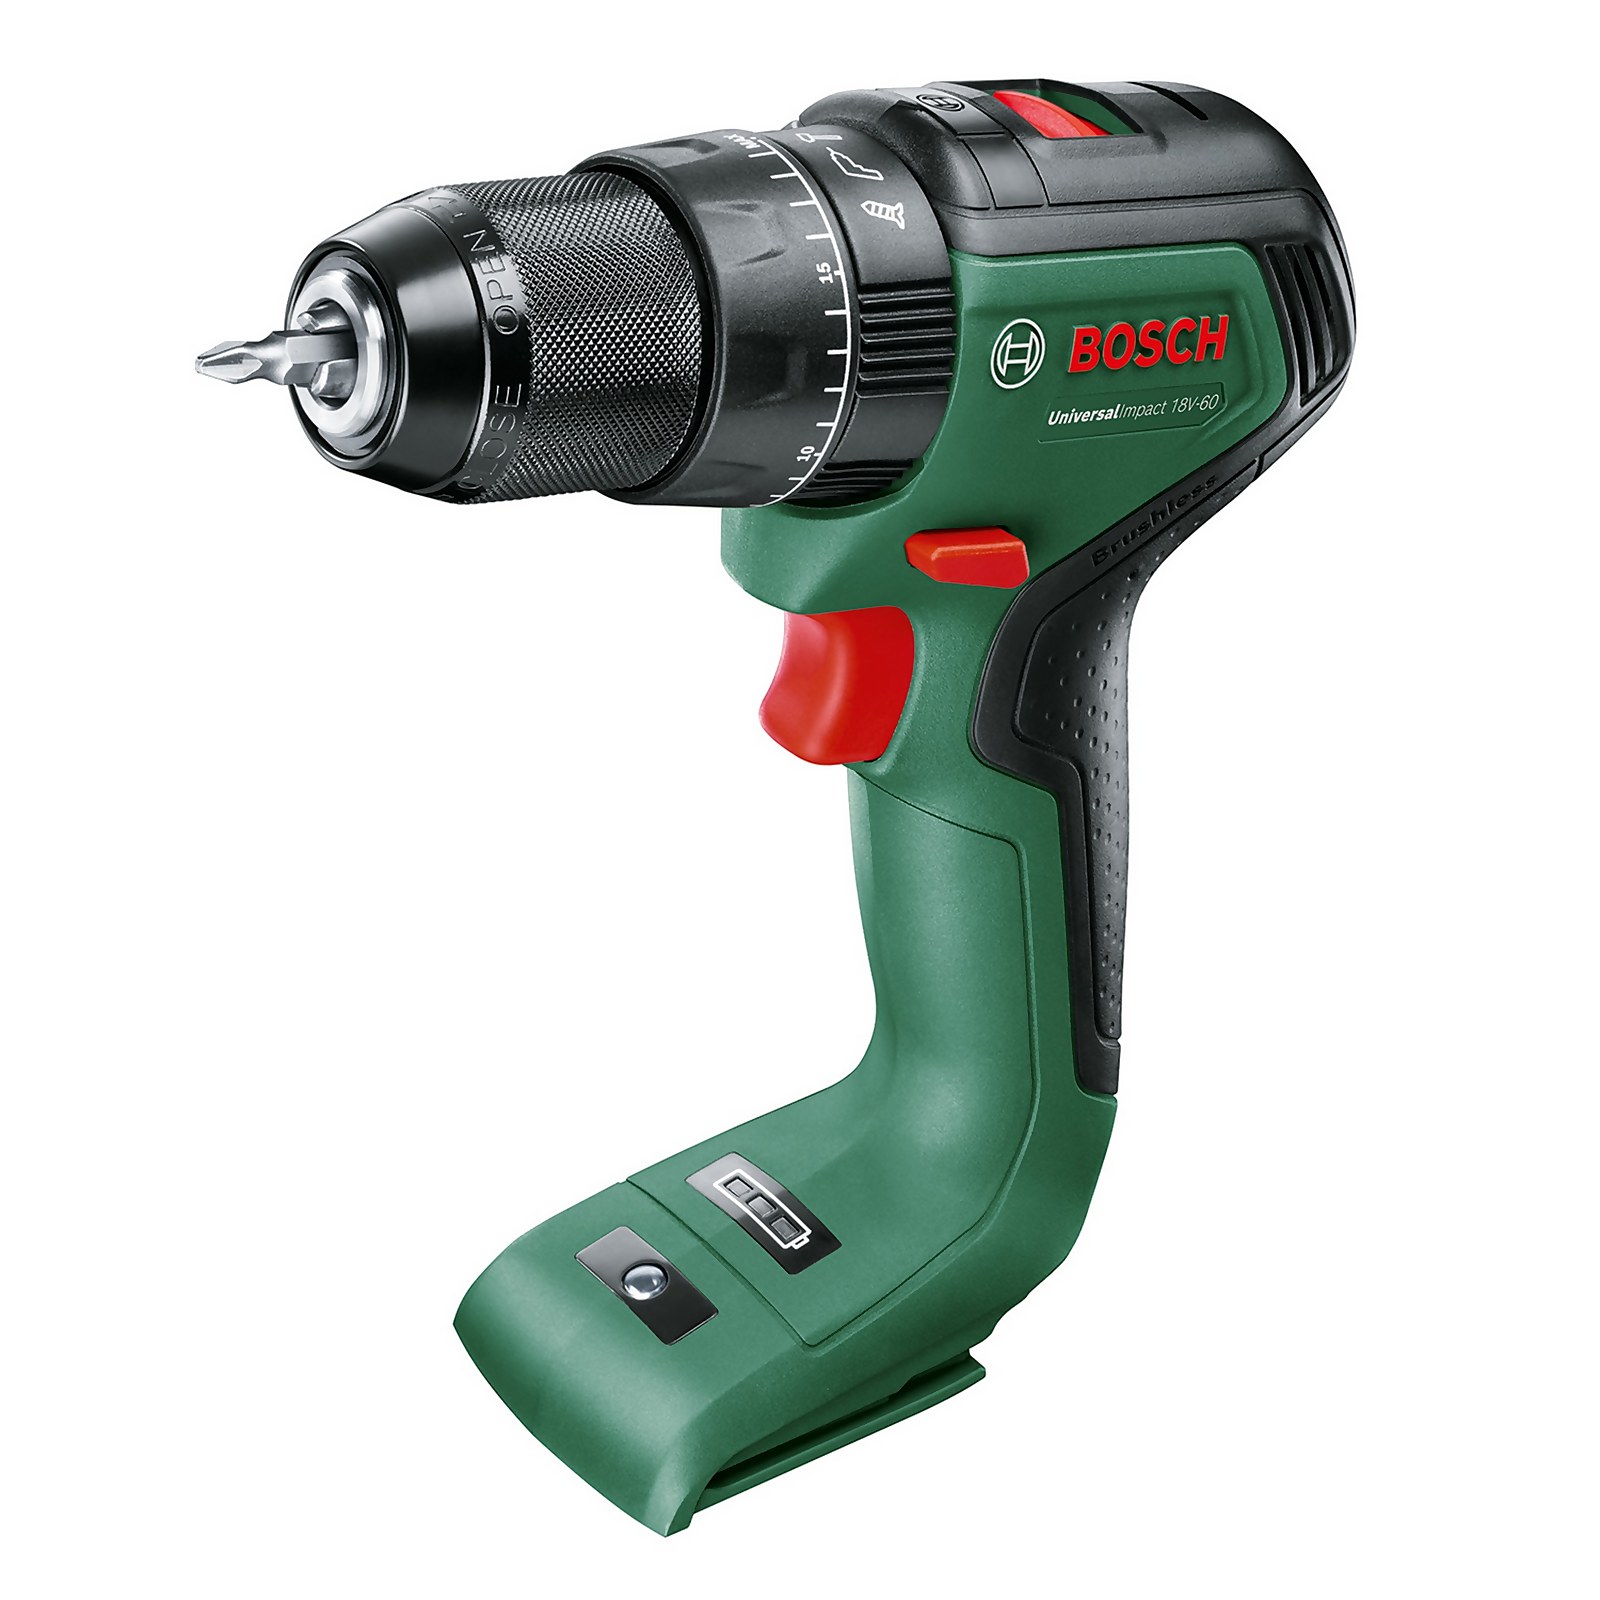 Photo of Bosch Universalimpact 18v-60 Drill Driver -no Battery Included-